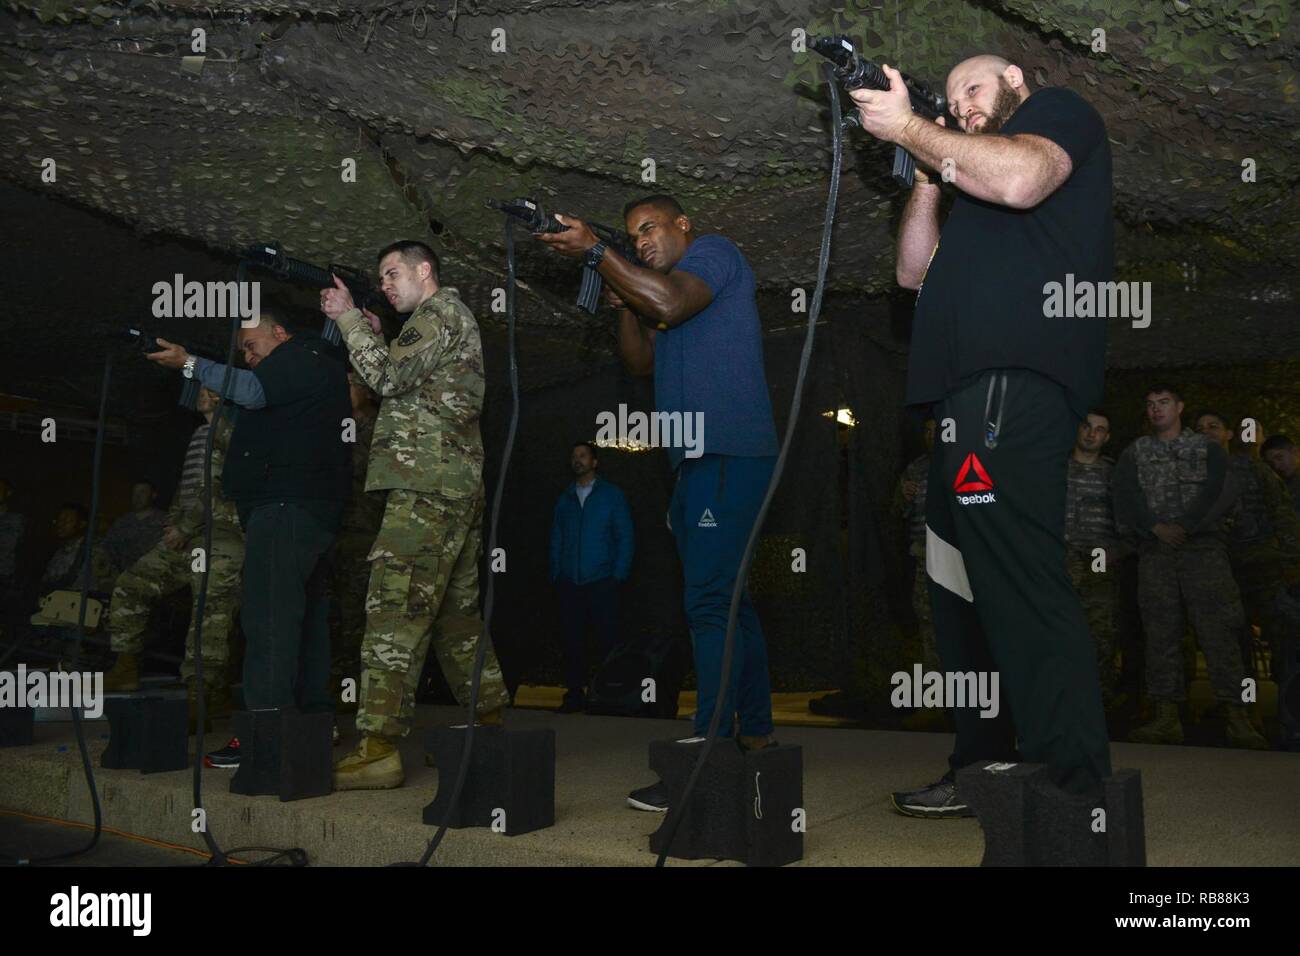 U.S. Army Soldiers operate Engagement Skills Trainer weapons with Brian  Garcia, left, MMAjunkie radio host, Lorenz Larkin, center, UFC welterweight  fighter, and Ben Rothwell, right, UFC heavyweight fighter, at Joint Base  Langley-Eustis,